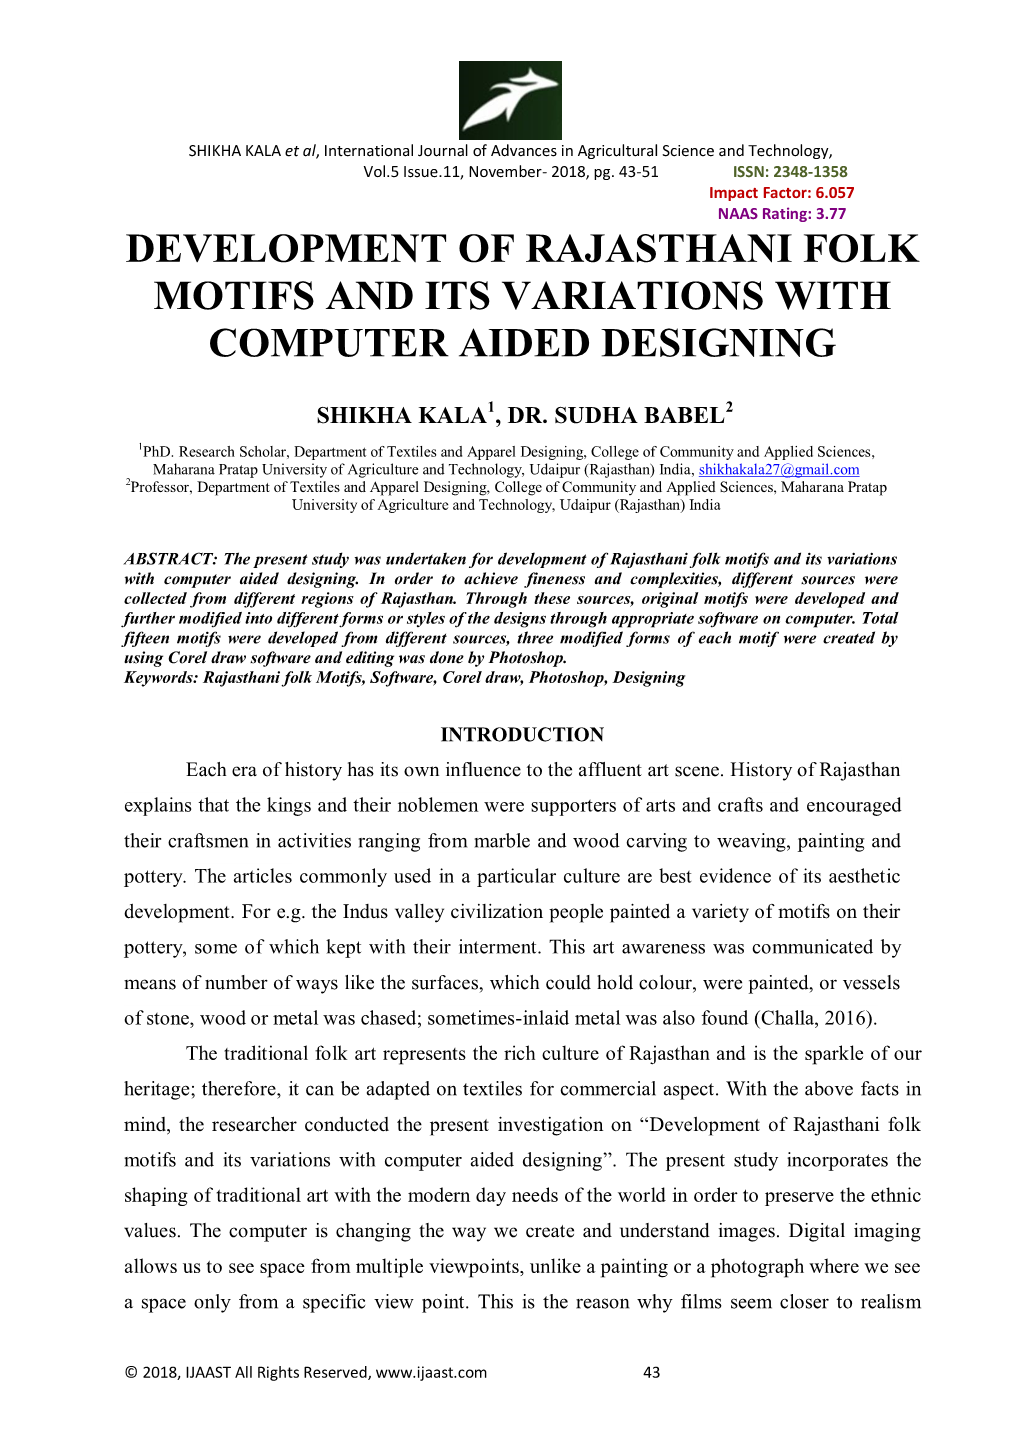 Development of Rajasthani Folk Motifs and Its Variations with Computer Aided Designing